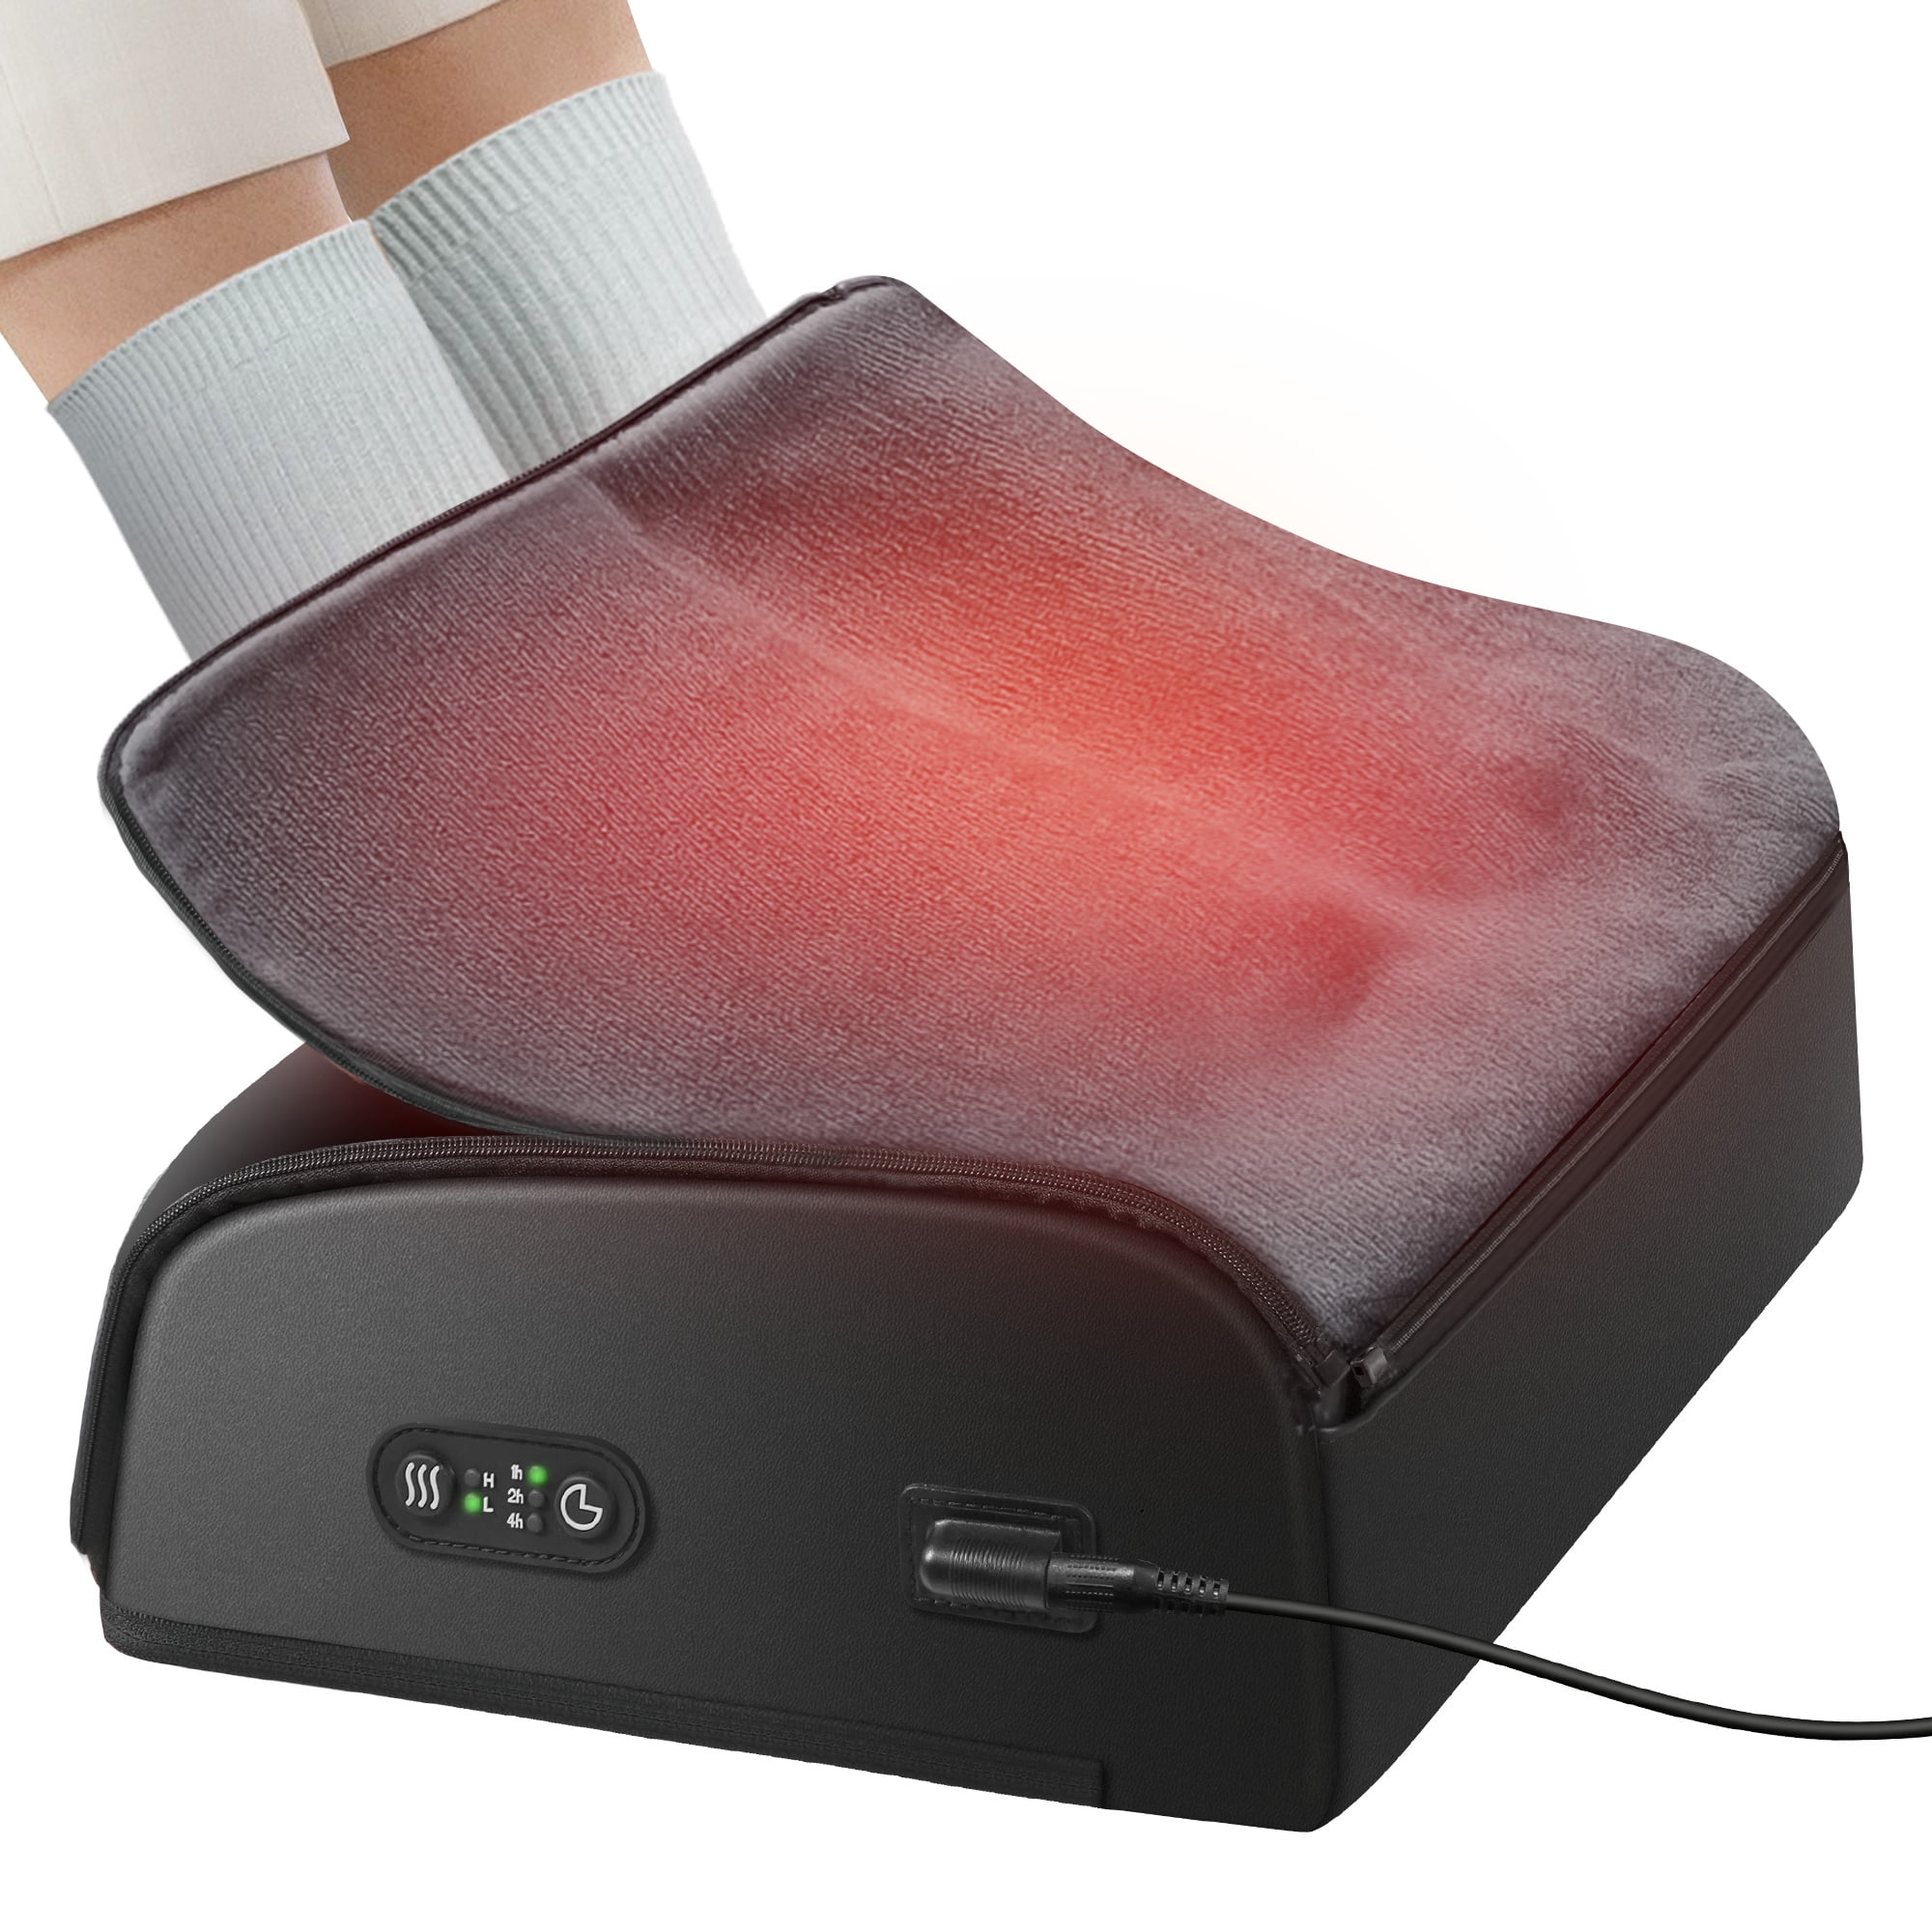 Comfier Foot Warmer &Heated Foot Rest for Under Desk,Adjustable Ergonomic  Foot Stand for Back&Leg Pain Relief,Gaming Foot Stool for Office&Computer